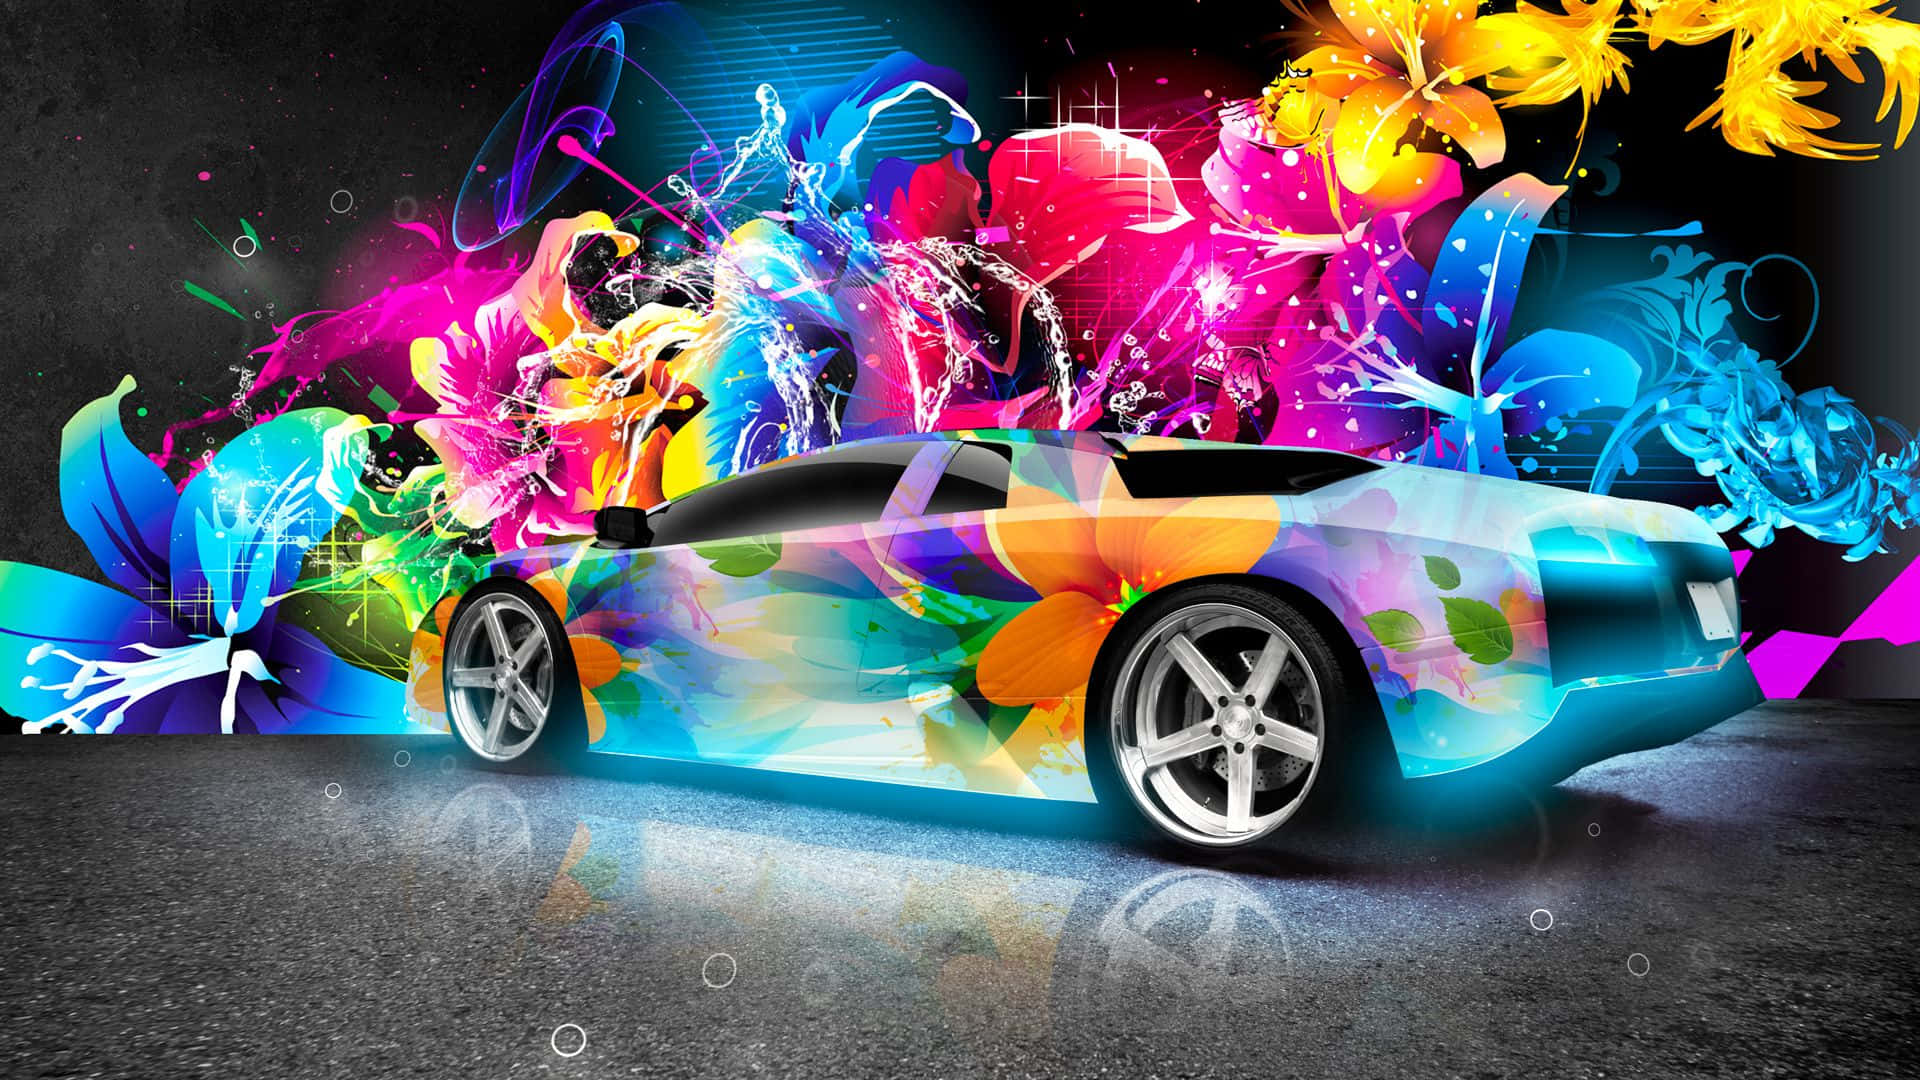 Download Rev Up the Speed and Style with Cool Neon Cars Wallpaper   Wallpaperscom